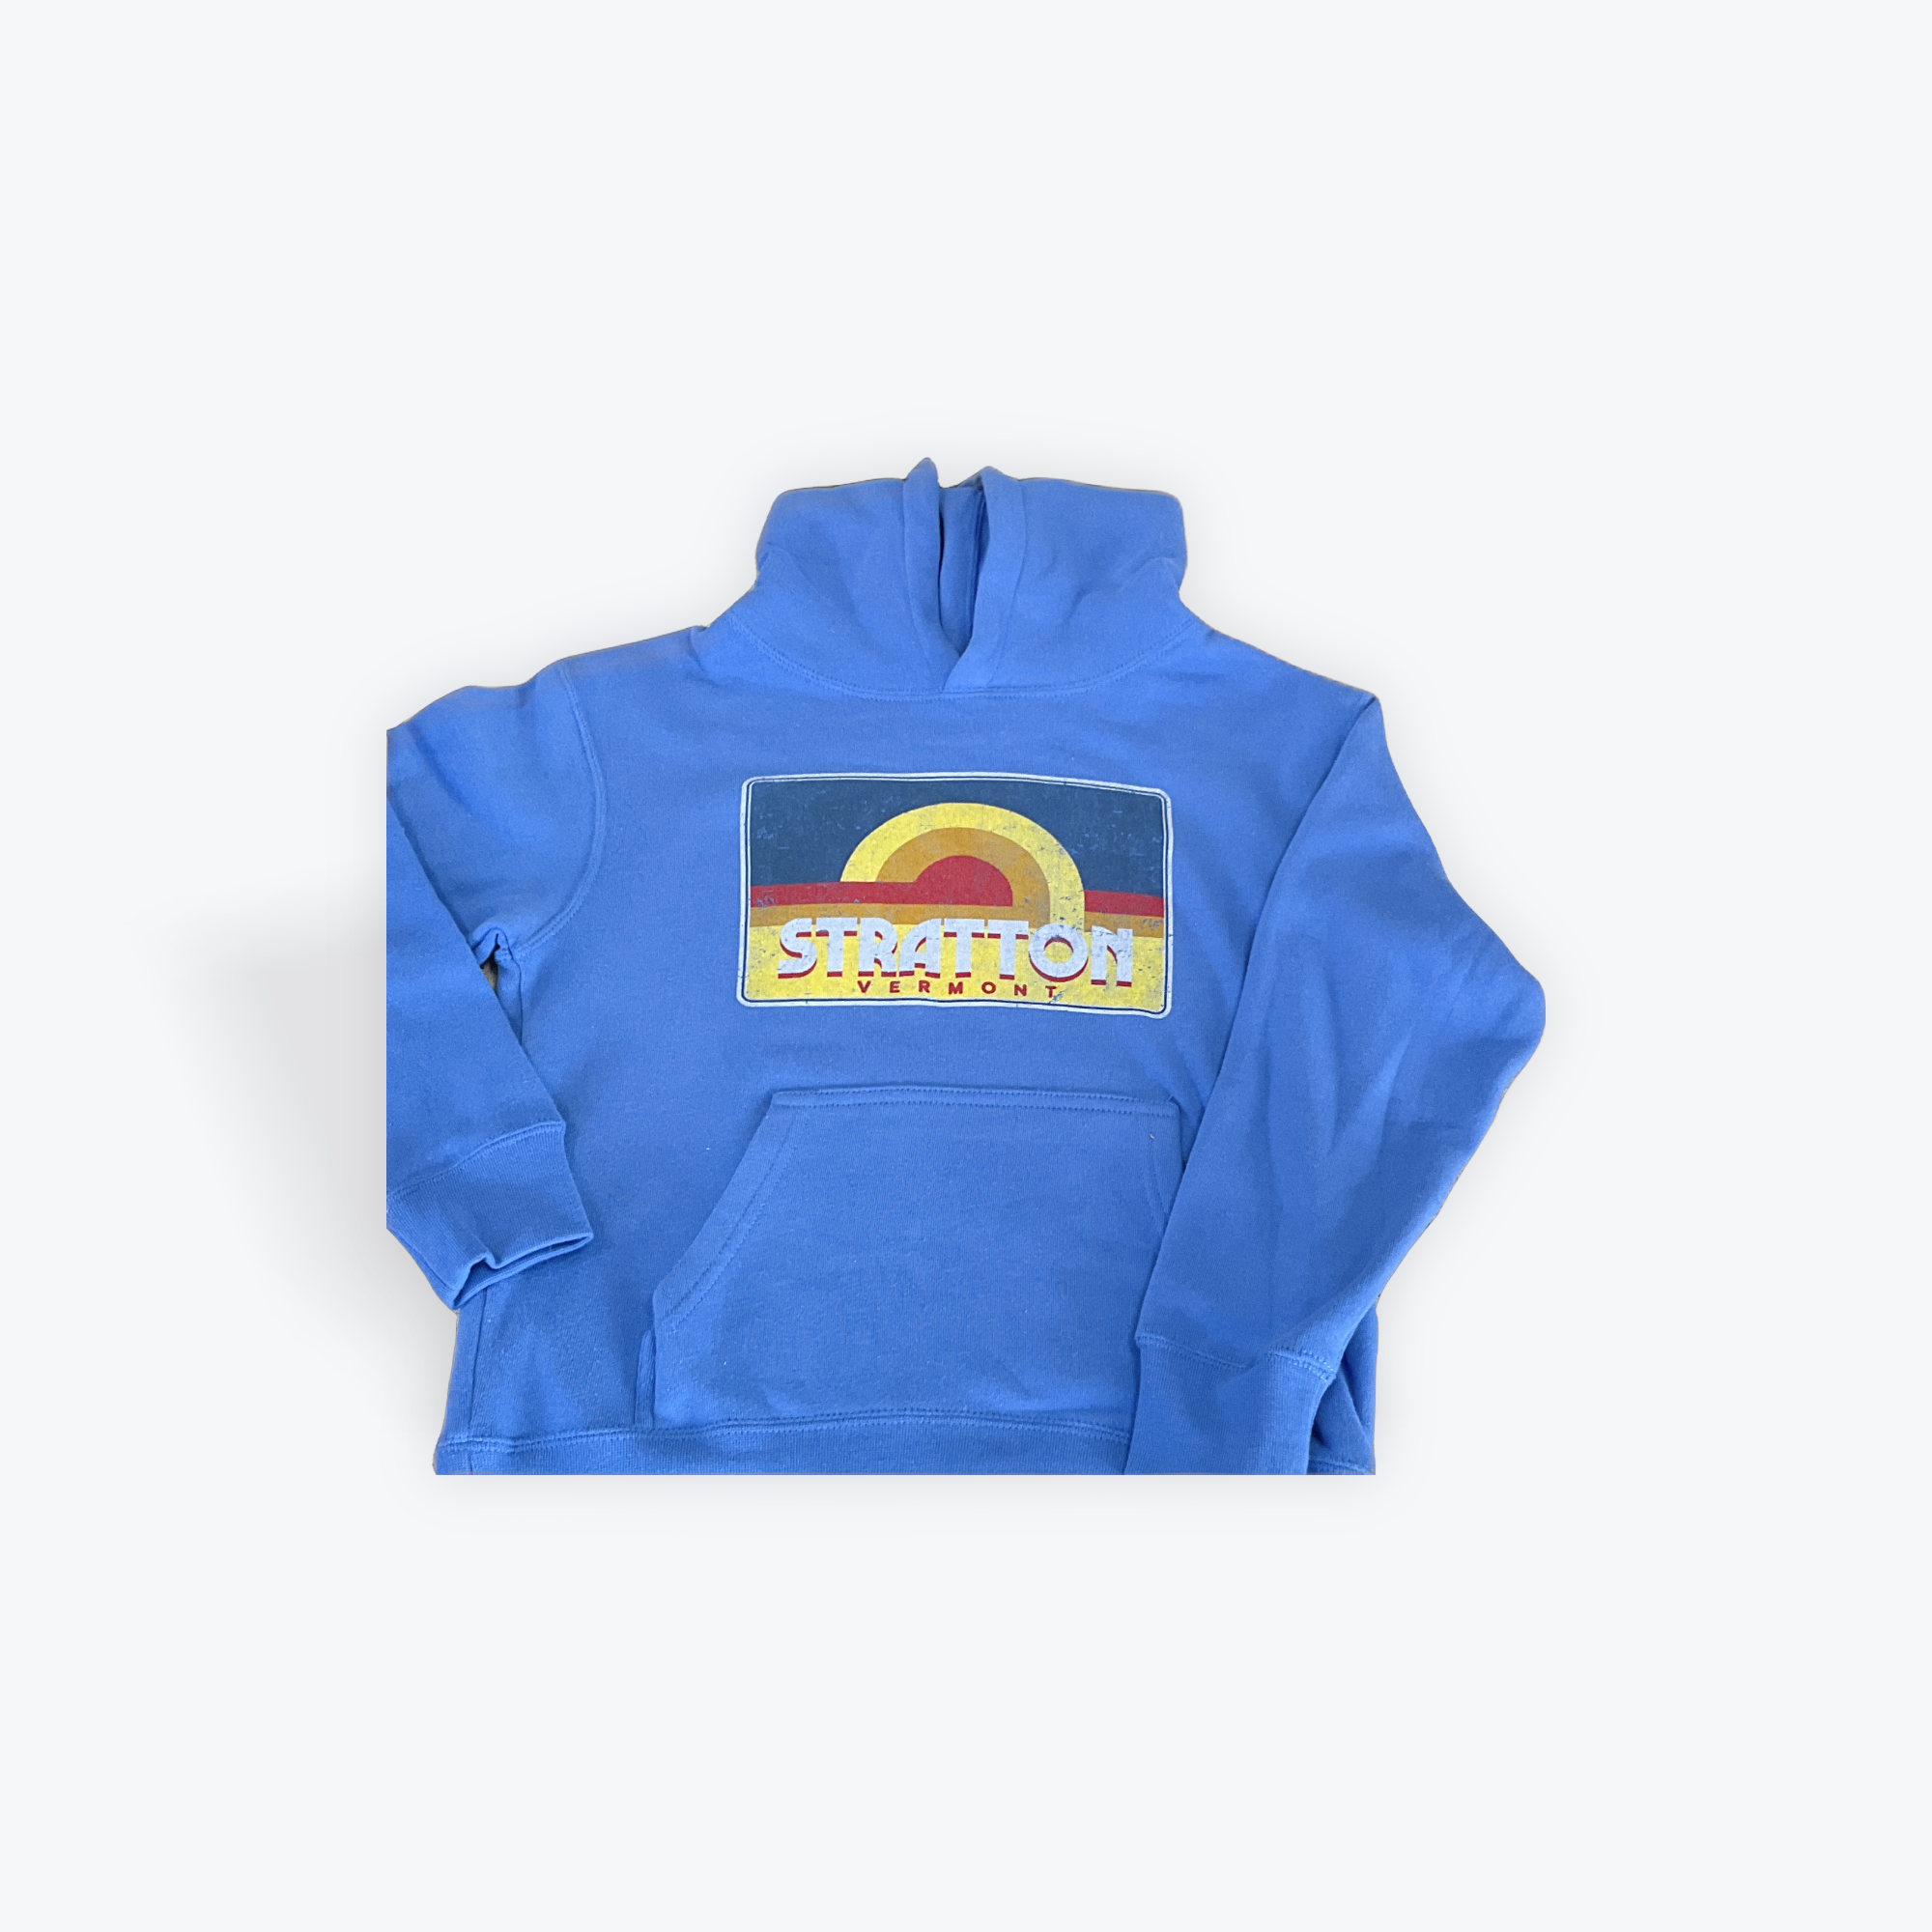 Stratton Youth Hoodie